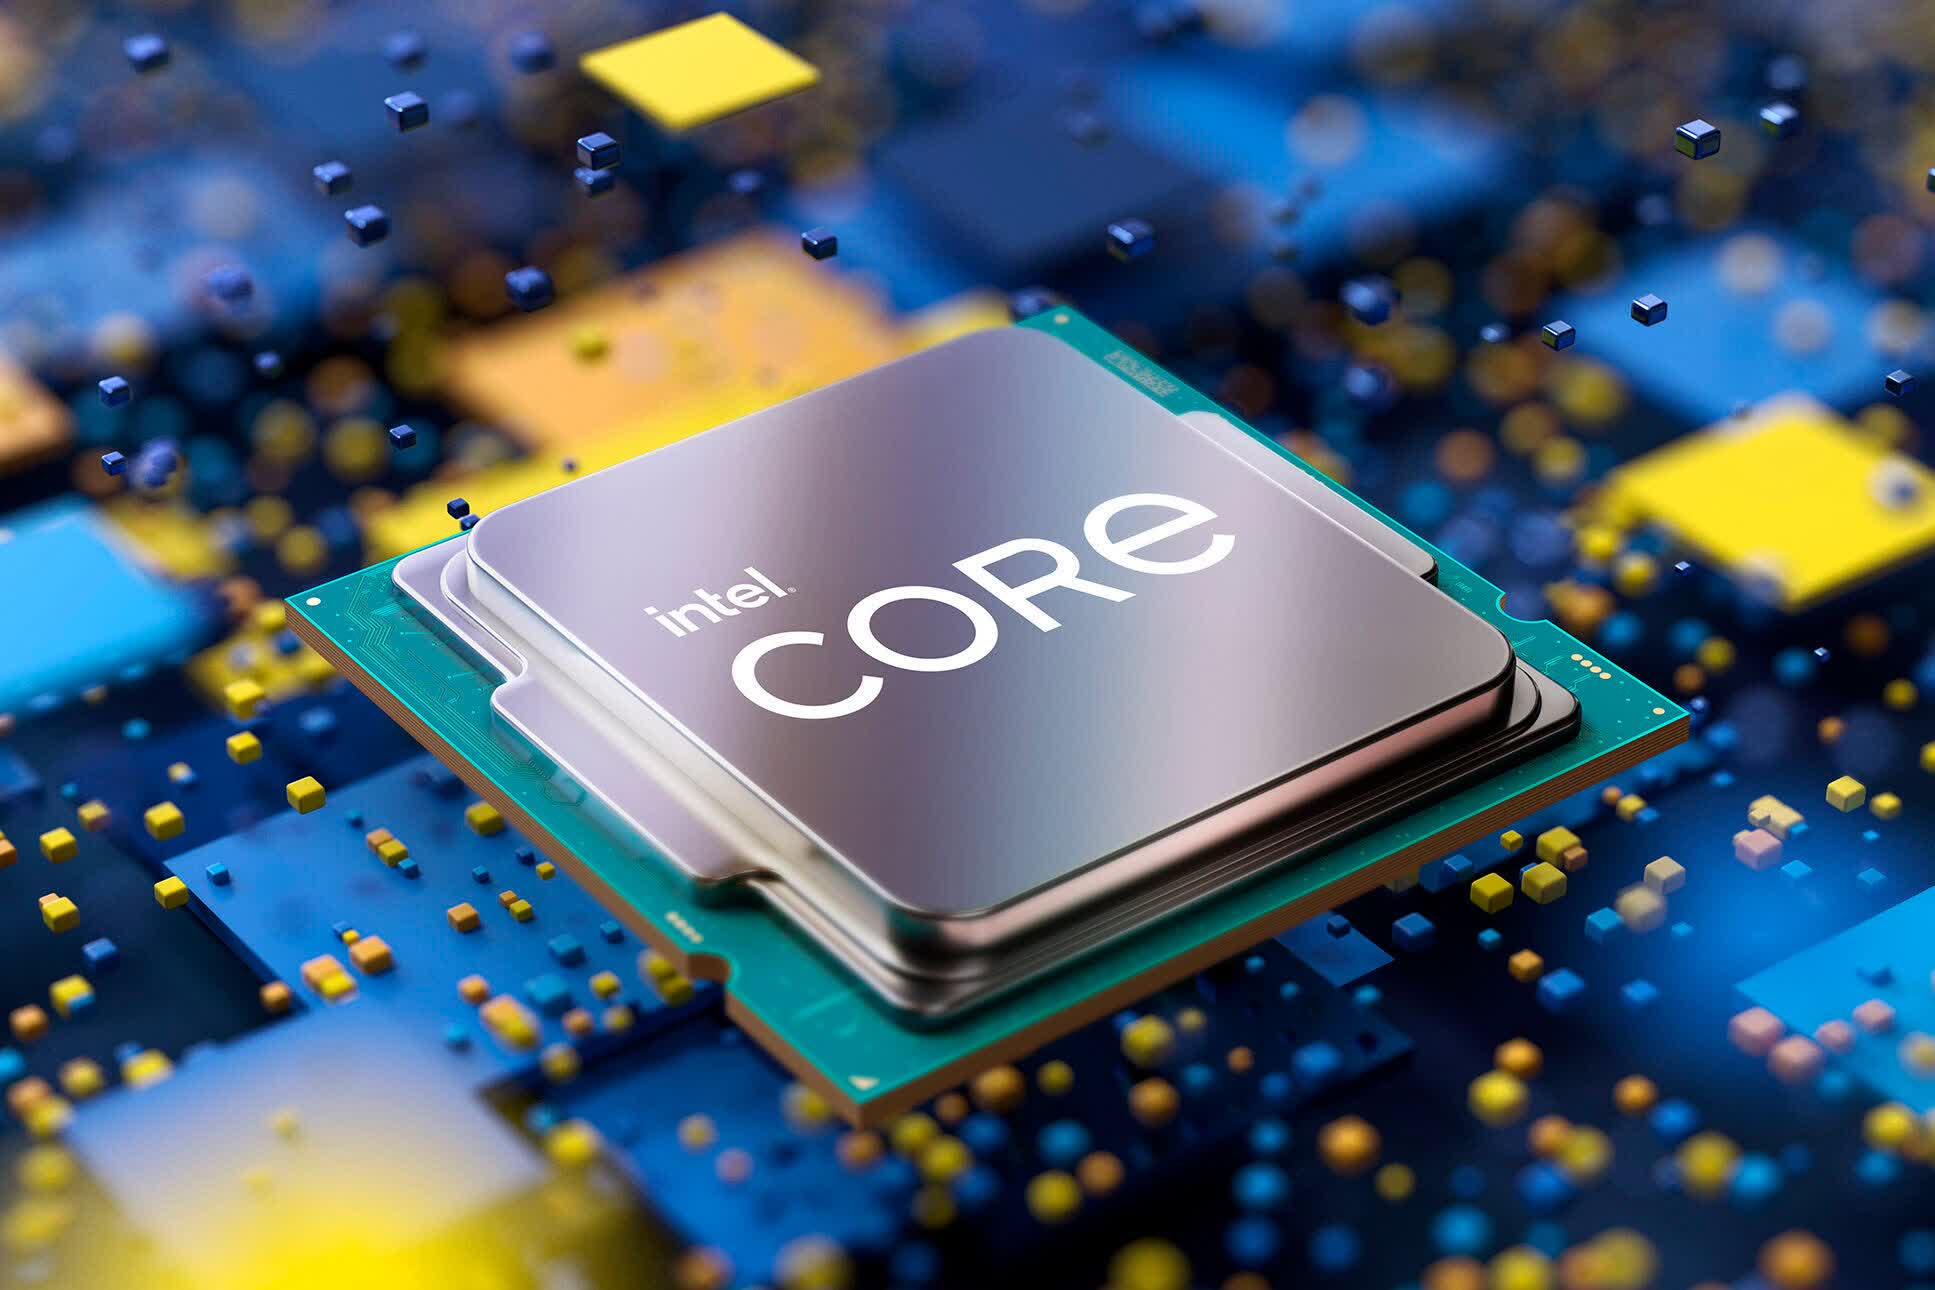 Intel Core i9-13900KF QS benchmarked at 6.1 GHz using liquid cooling